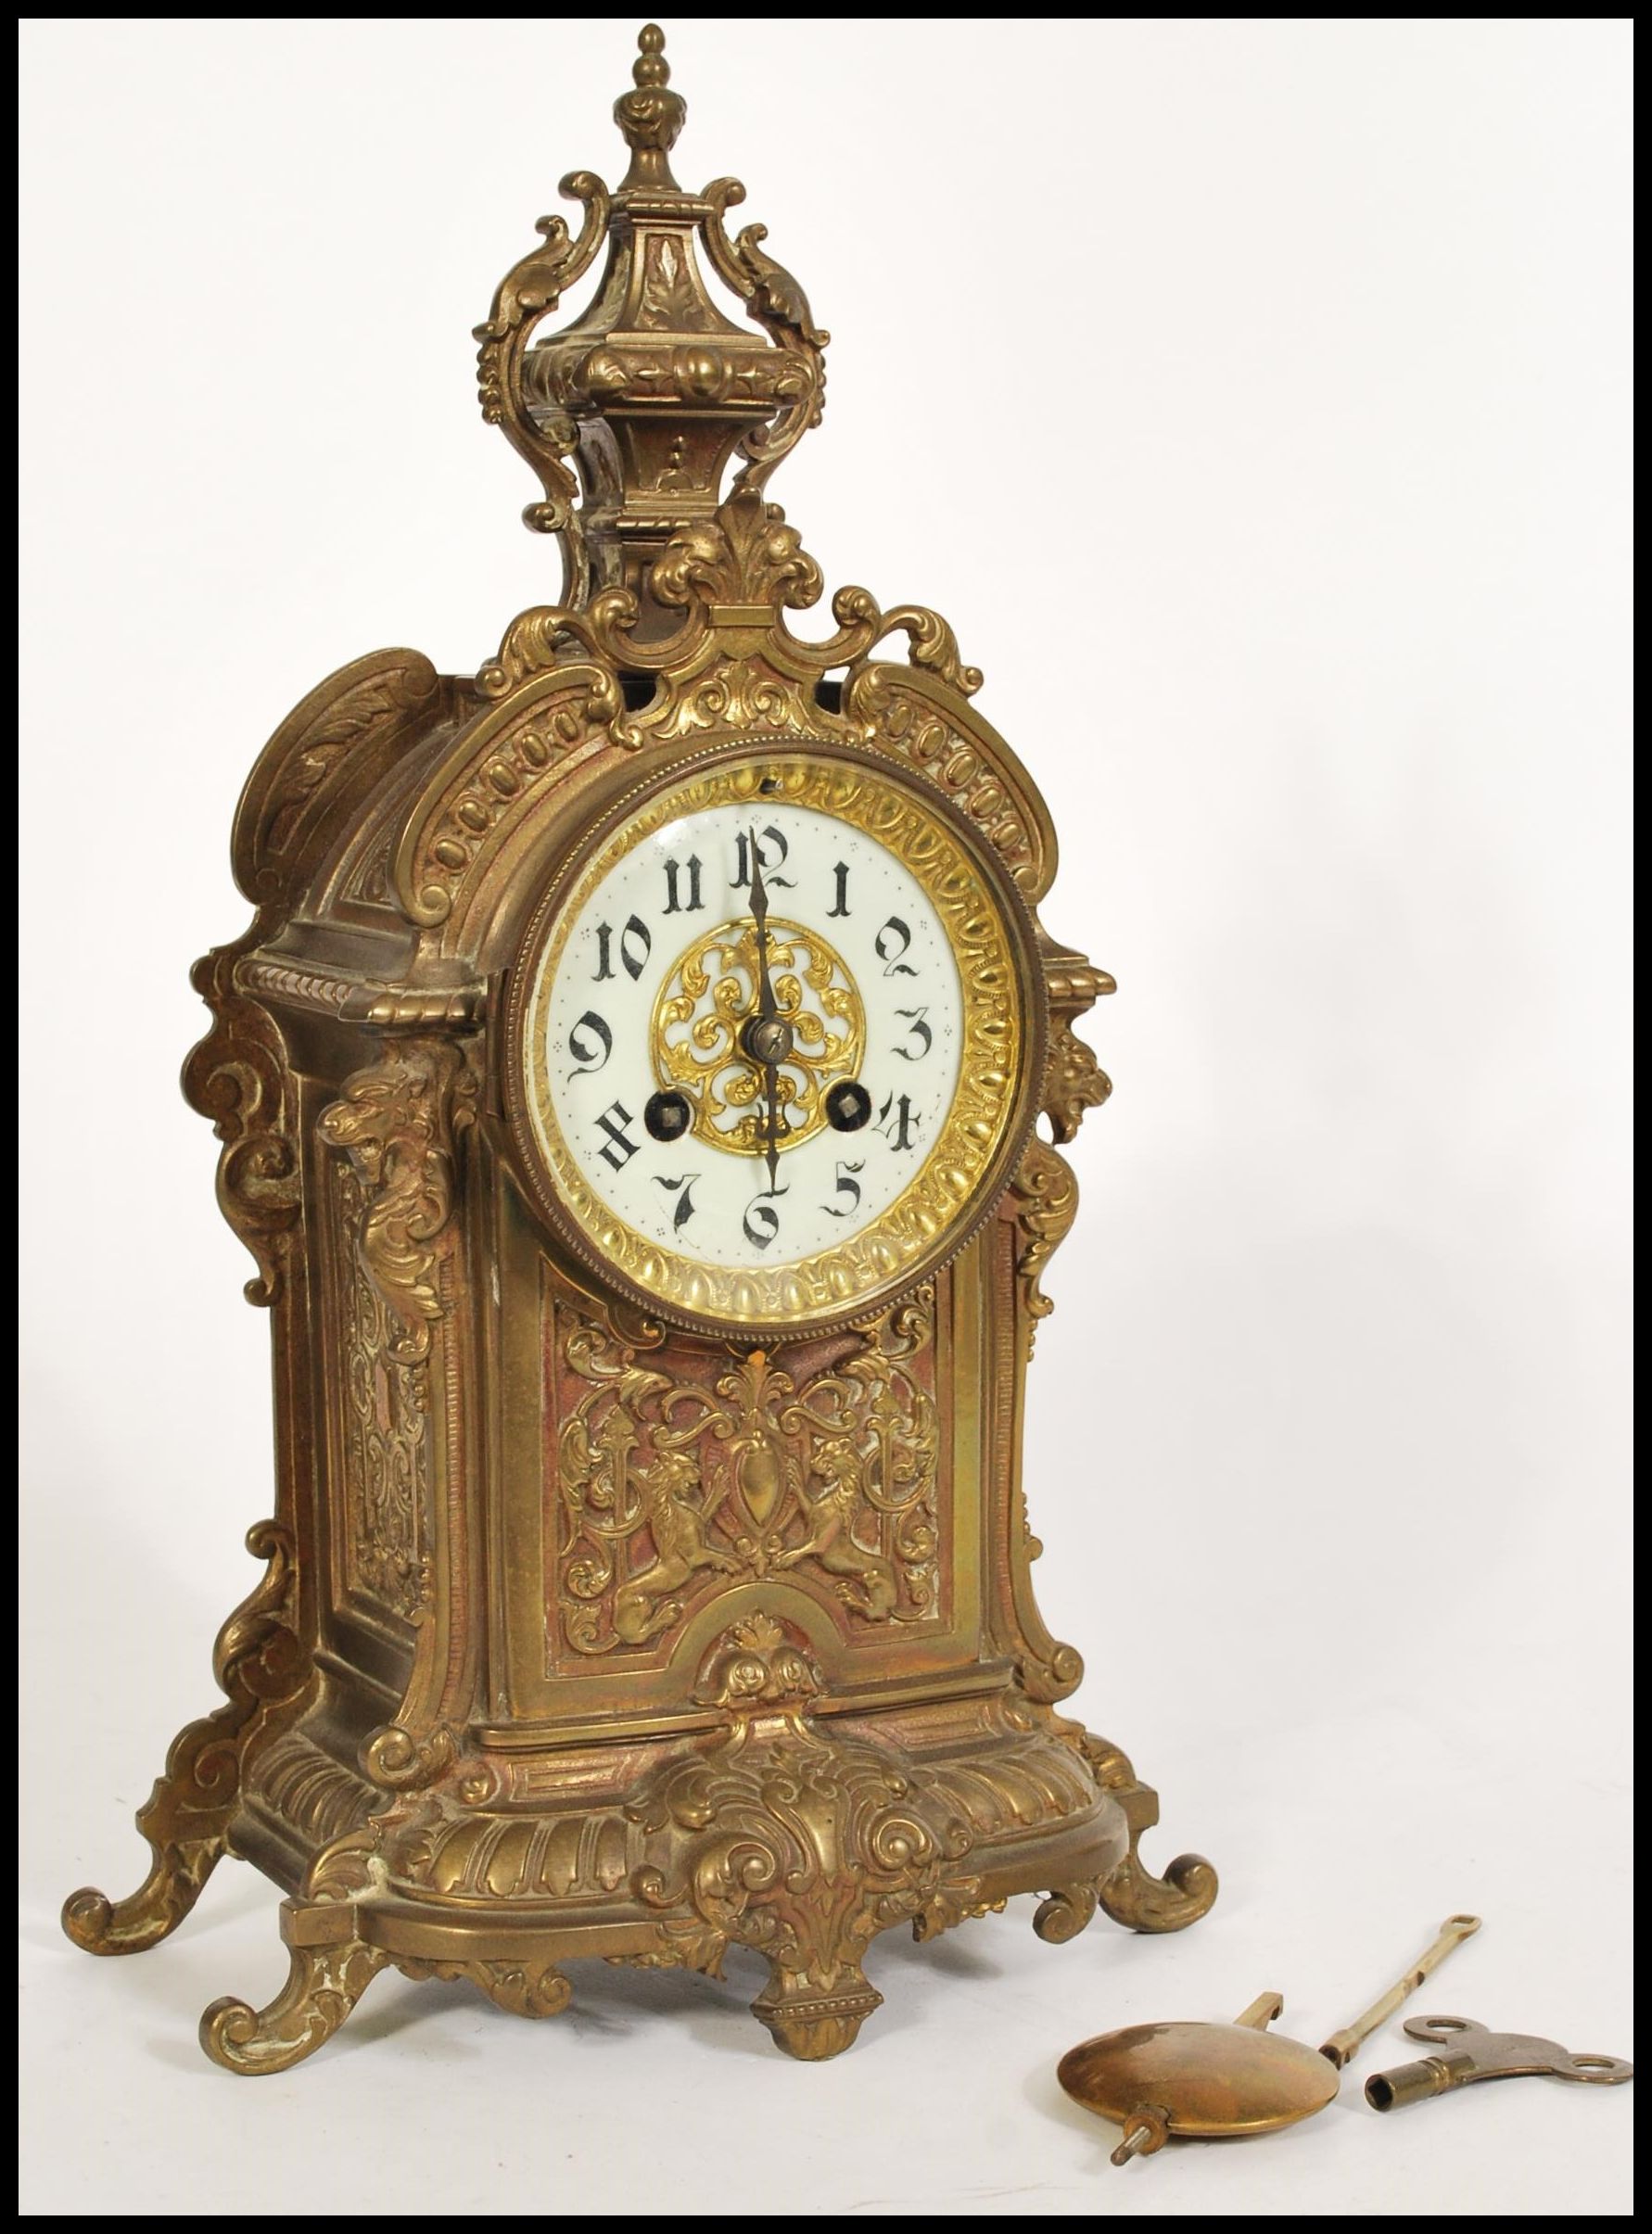 A 19th Century French gilt metal eight day mantel clock striking on a bell, the case ornately cast